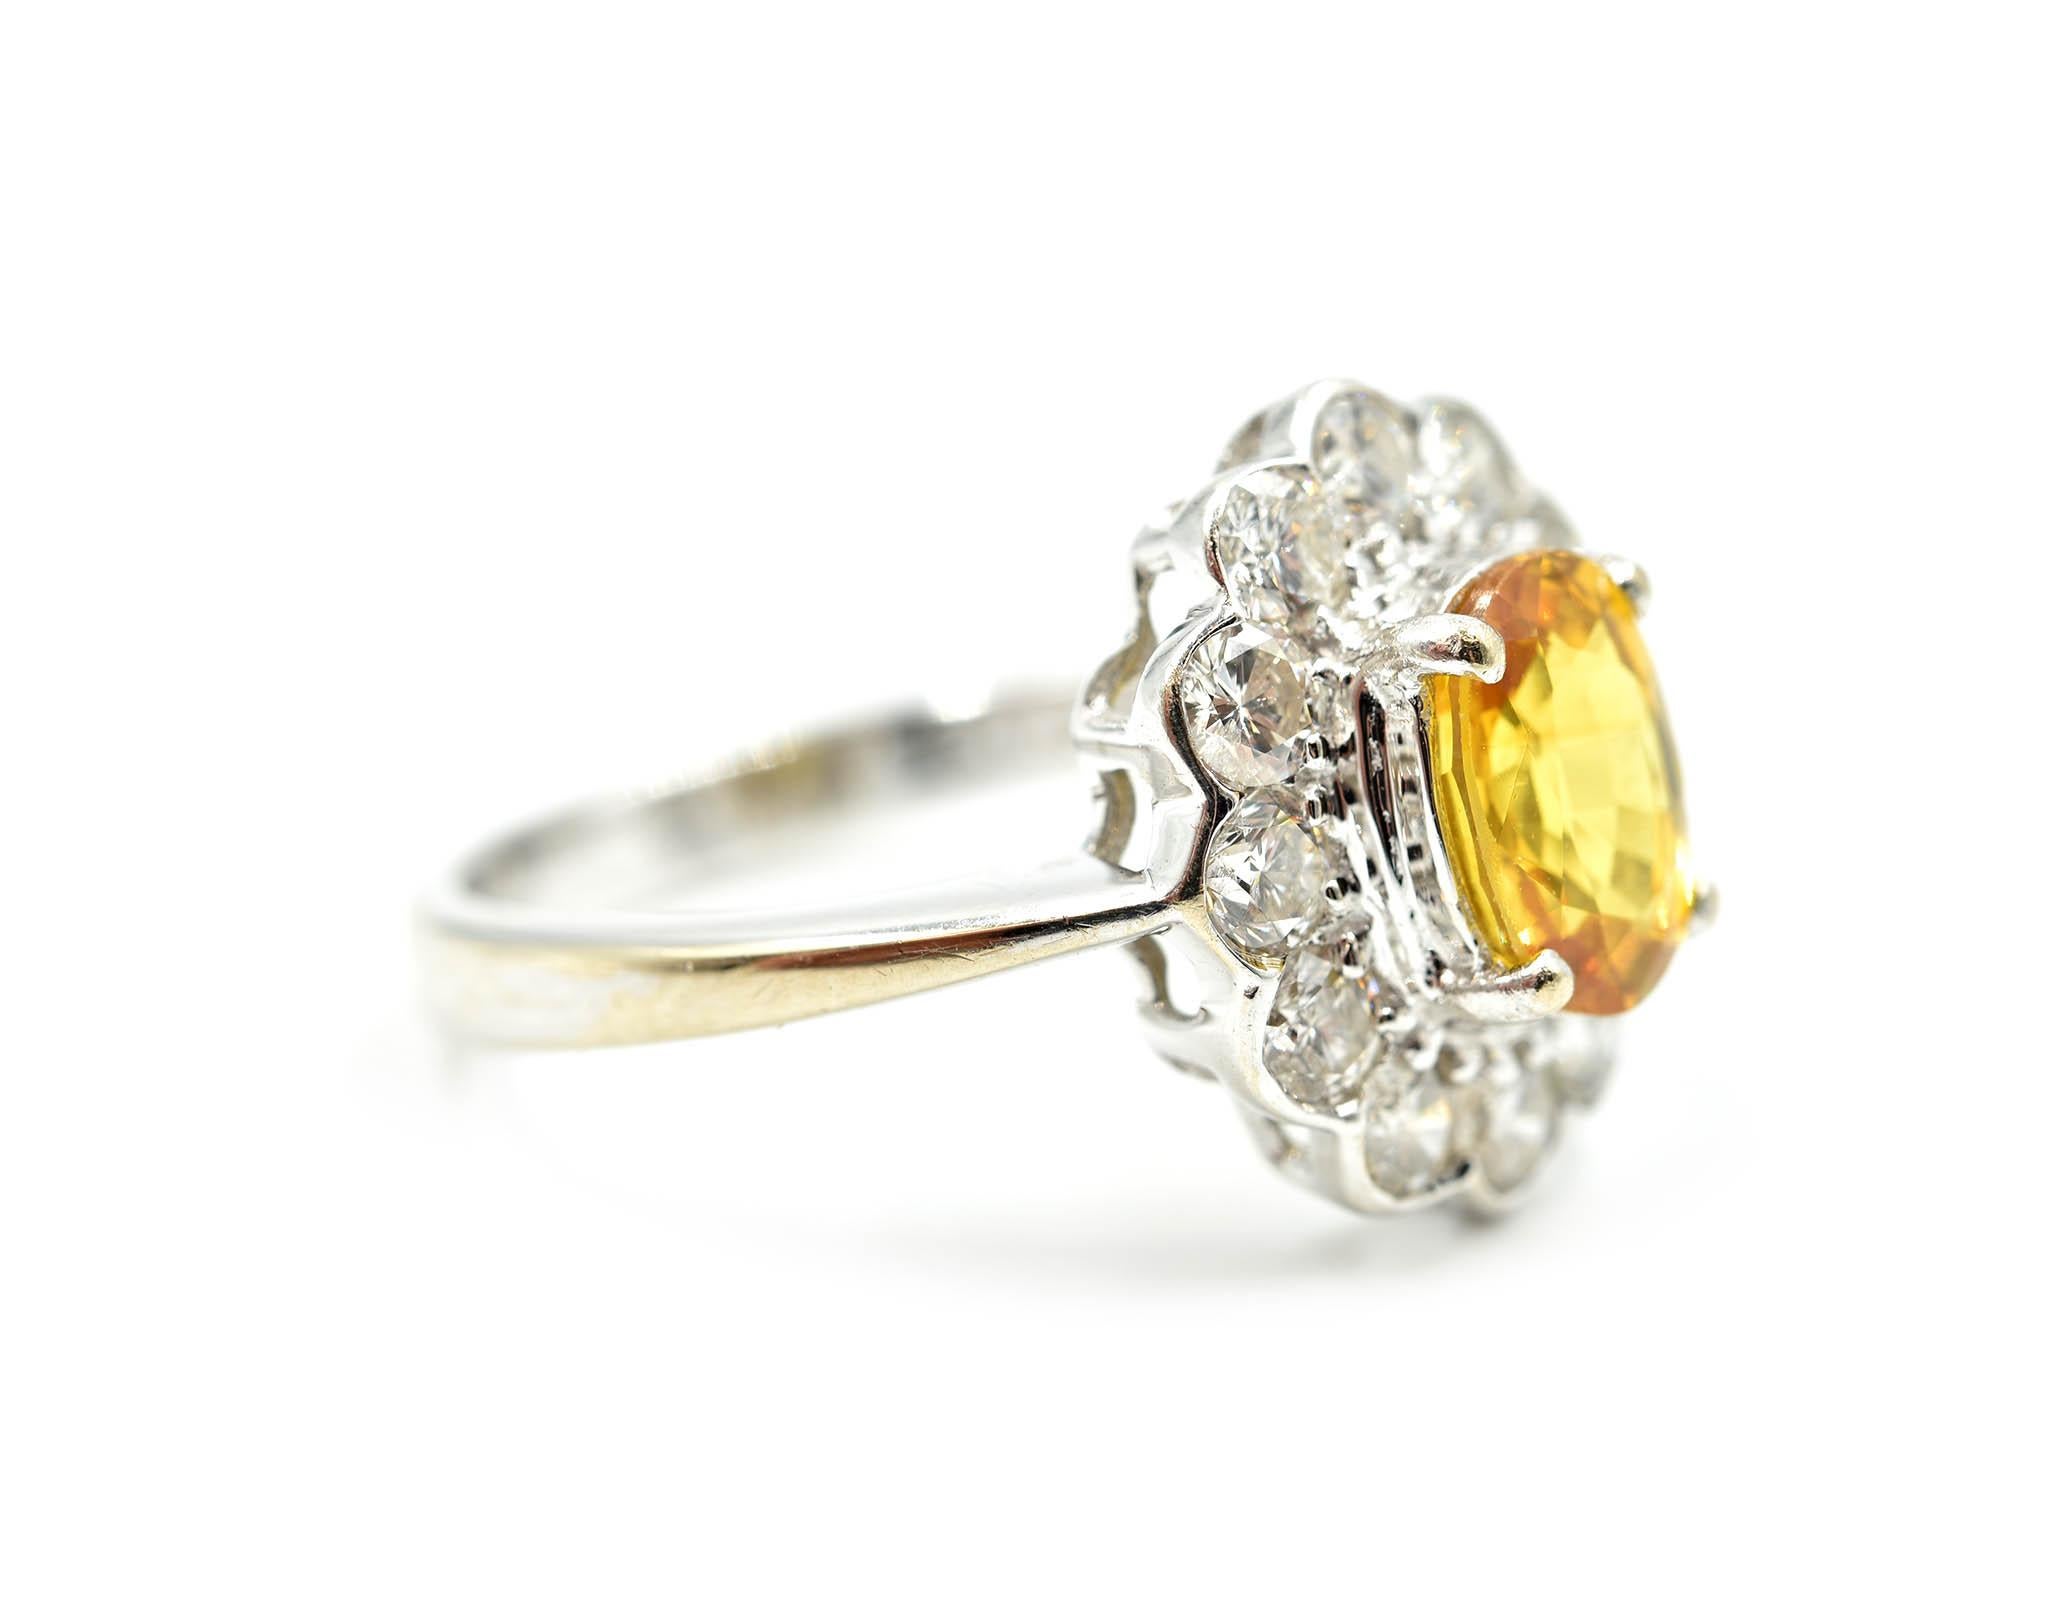 Designer: custom design
Material: 18k white gold
Yellow Sapphire: one oval cut 1.41 carat yellow sapphire
Diamond: twelve round brilliant cut diamonds = 1.00 carat weight
Color: H
Clarity: VS2-SI1
Dimensions: ring top measures 1/2-inch long and